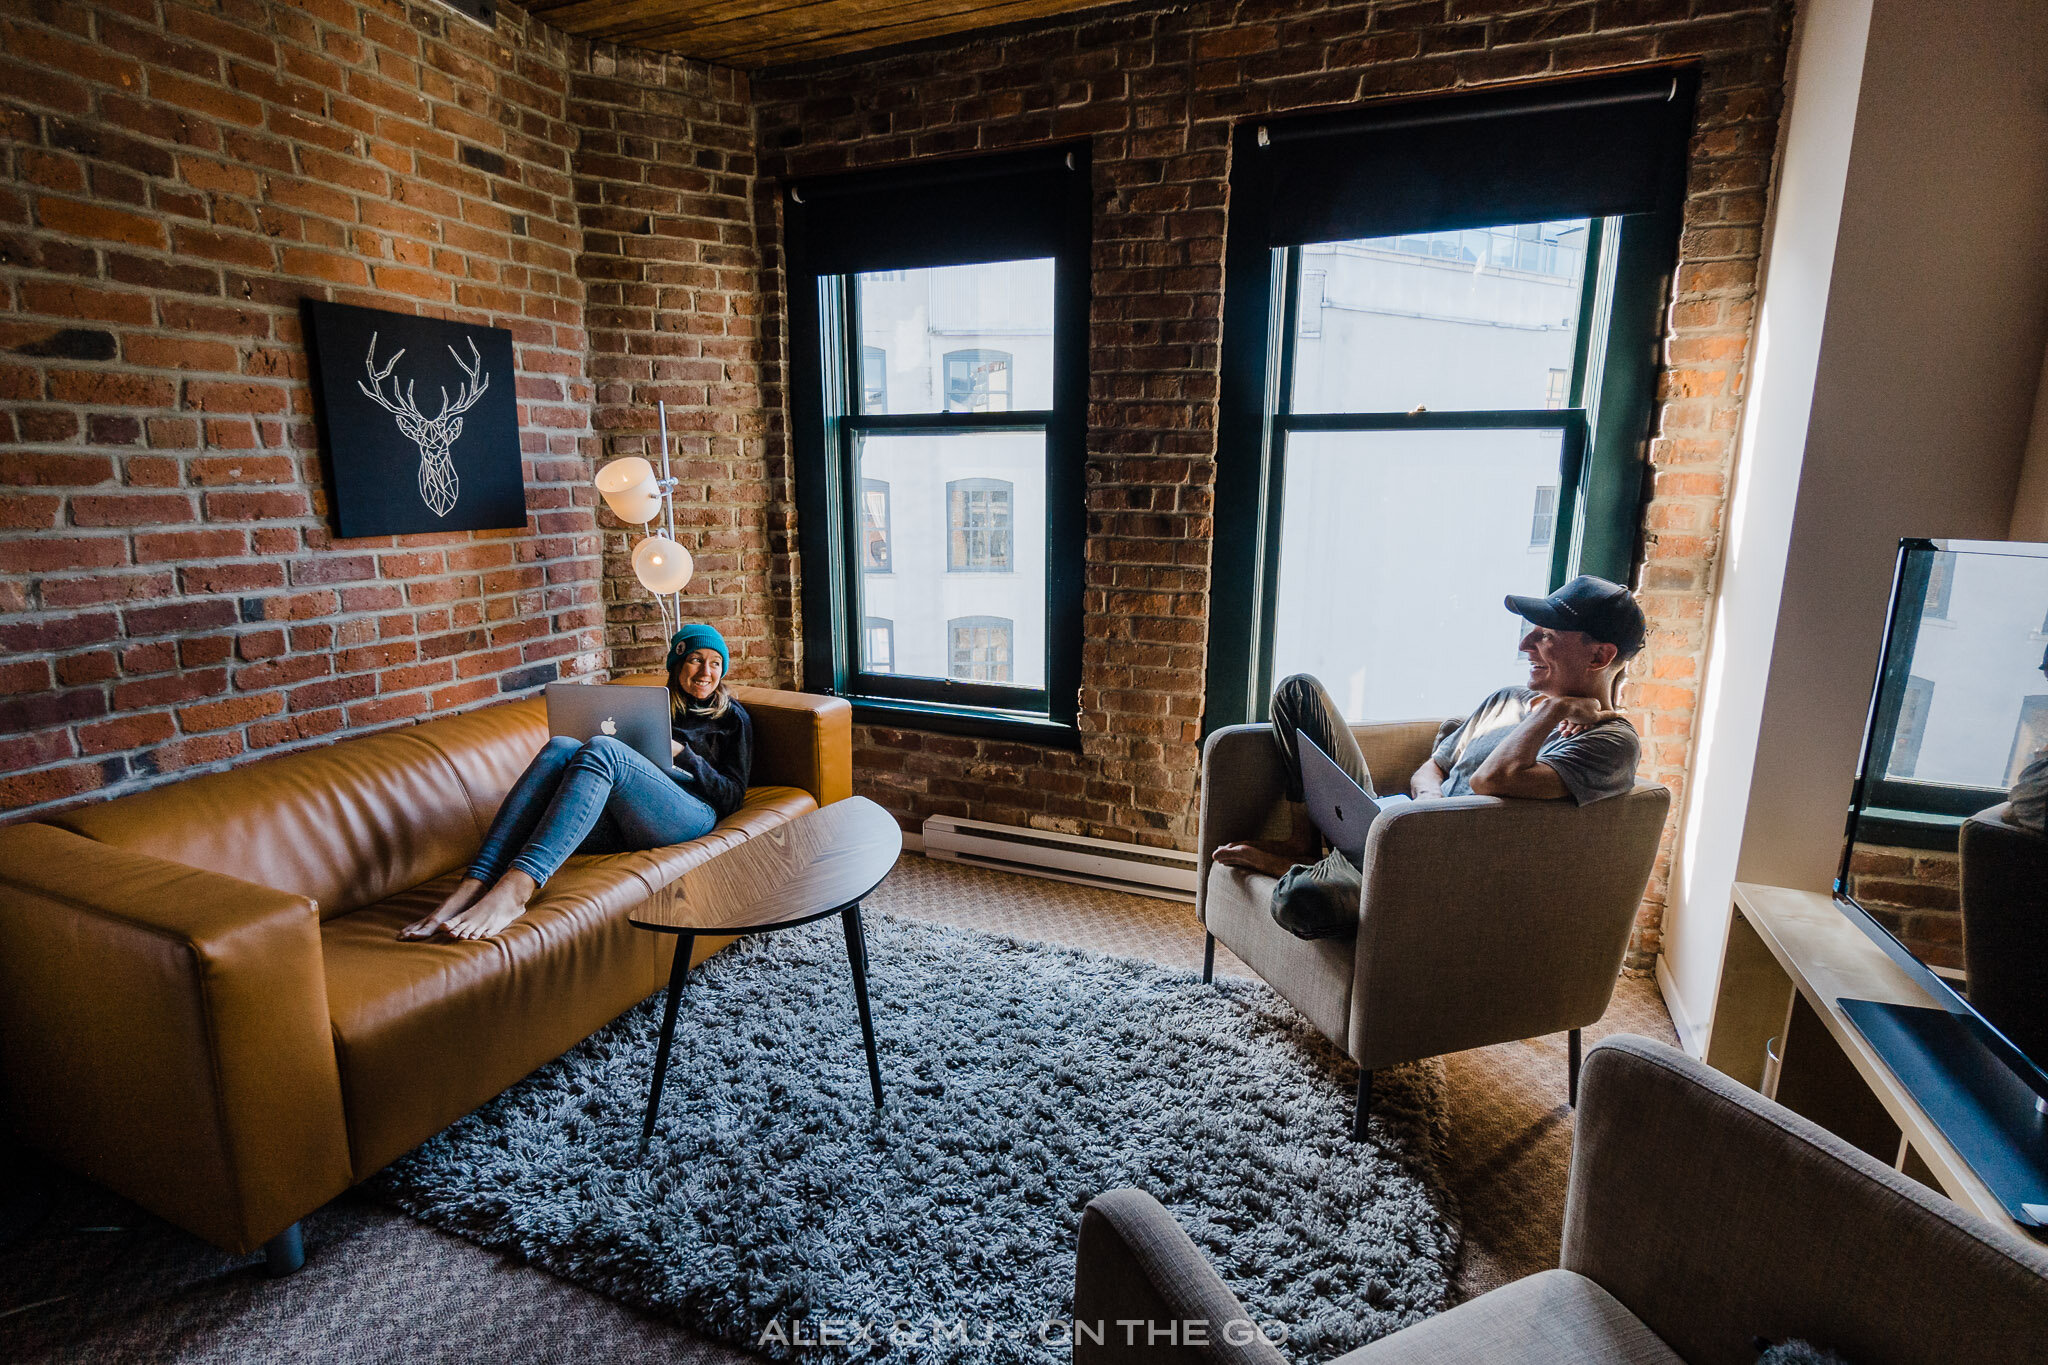 Alex-MJ-On-the-GO-Vancouver_Gastown_airbnb.jpg